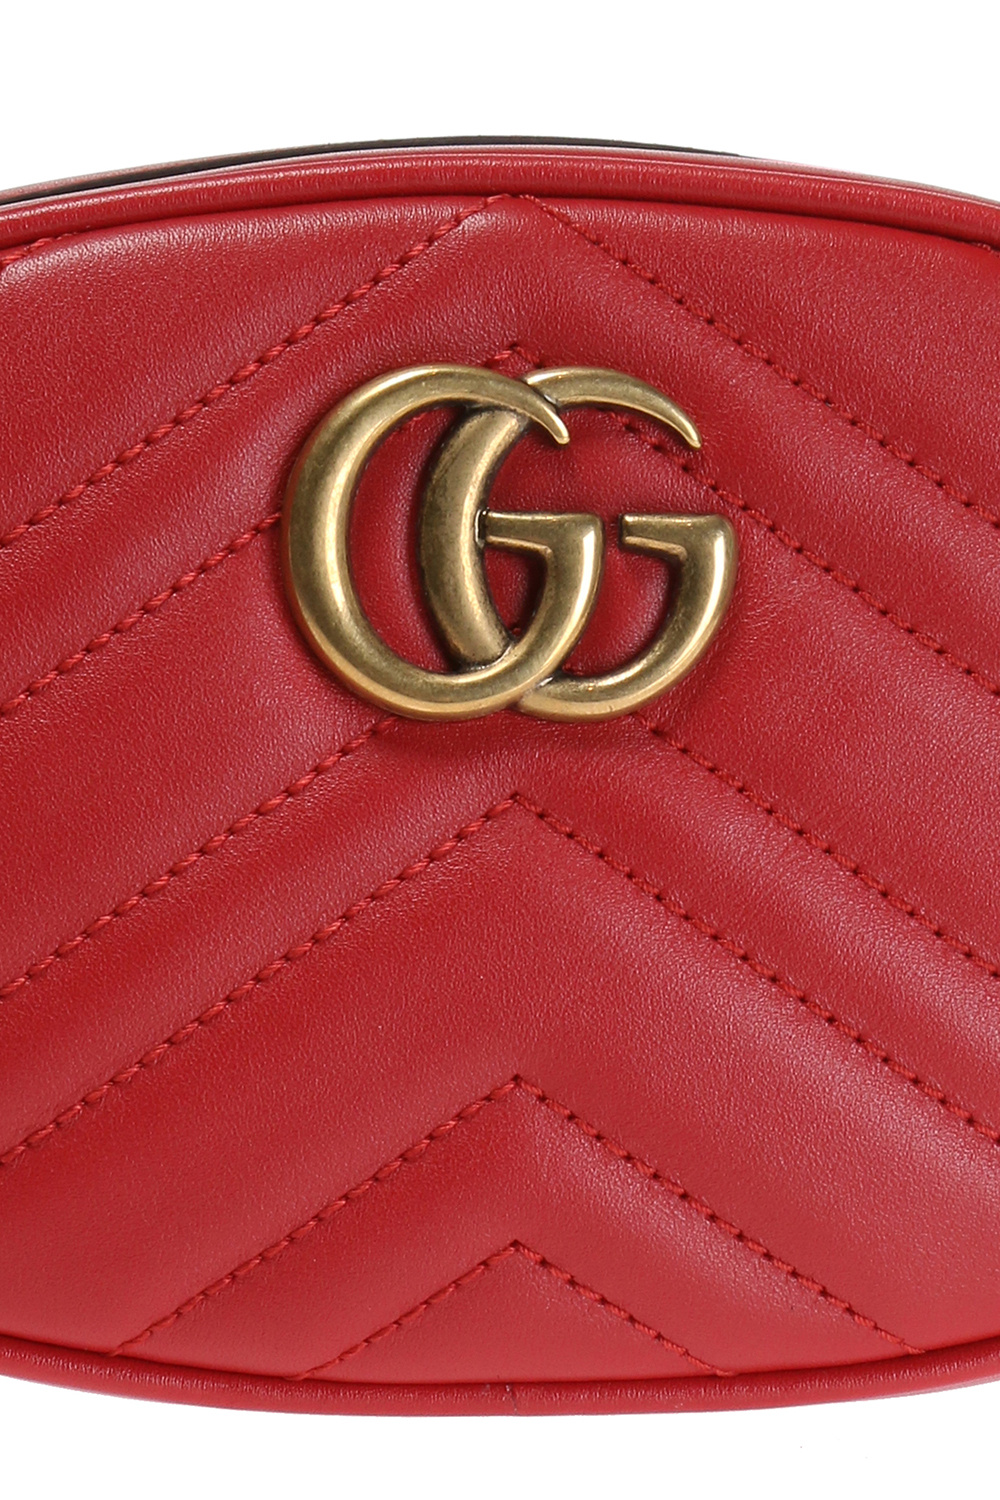 GUCCI Shoulder Bags Women  GG Marmont mini bag Red  GUCCI 699514  DTDHT6832  Leam Luxury Shopping Online